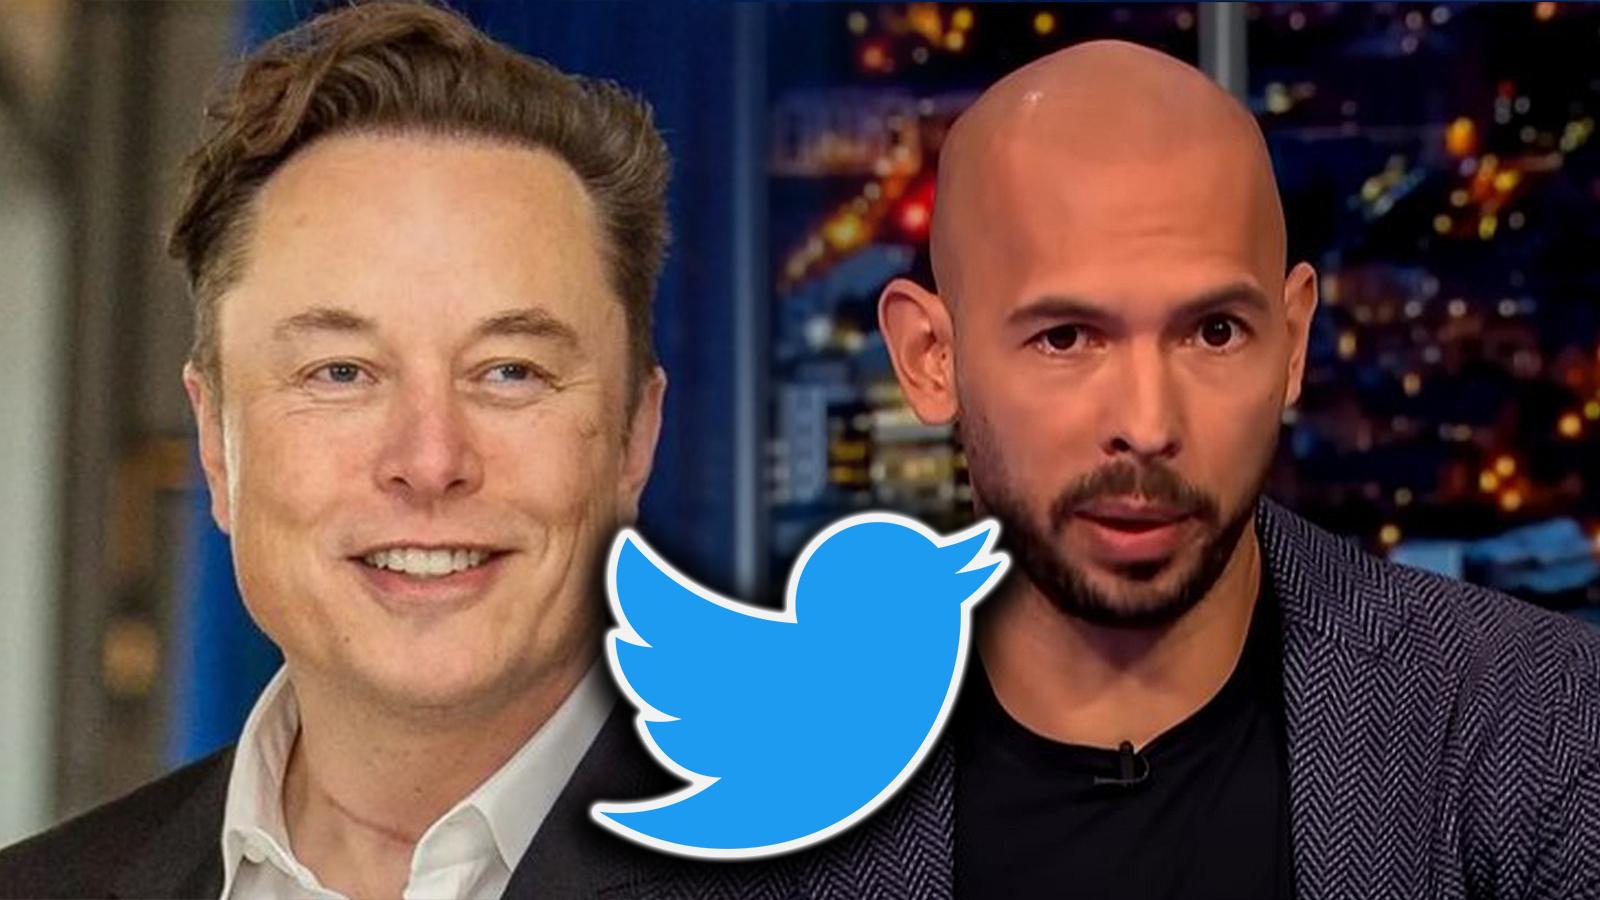 Andrew Tate pleads with elon musk not to delete dead fathers twitter account